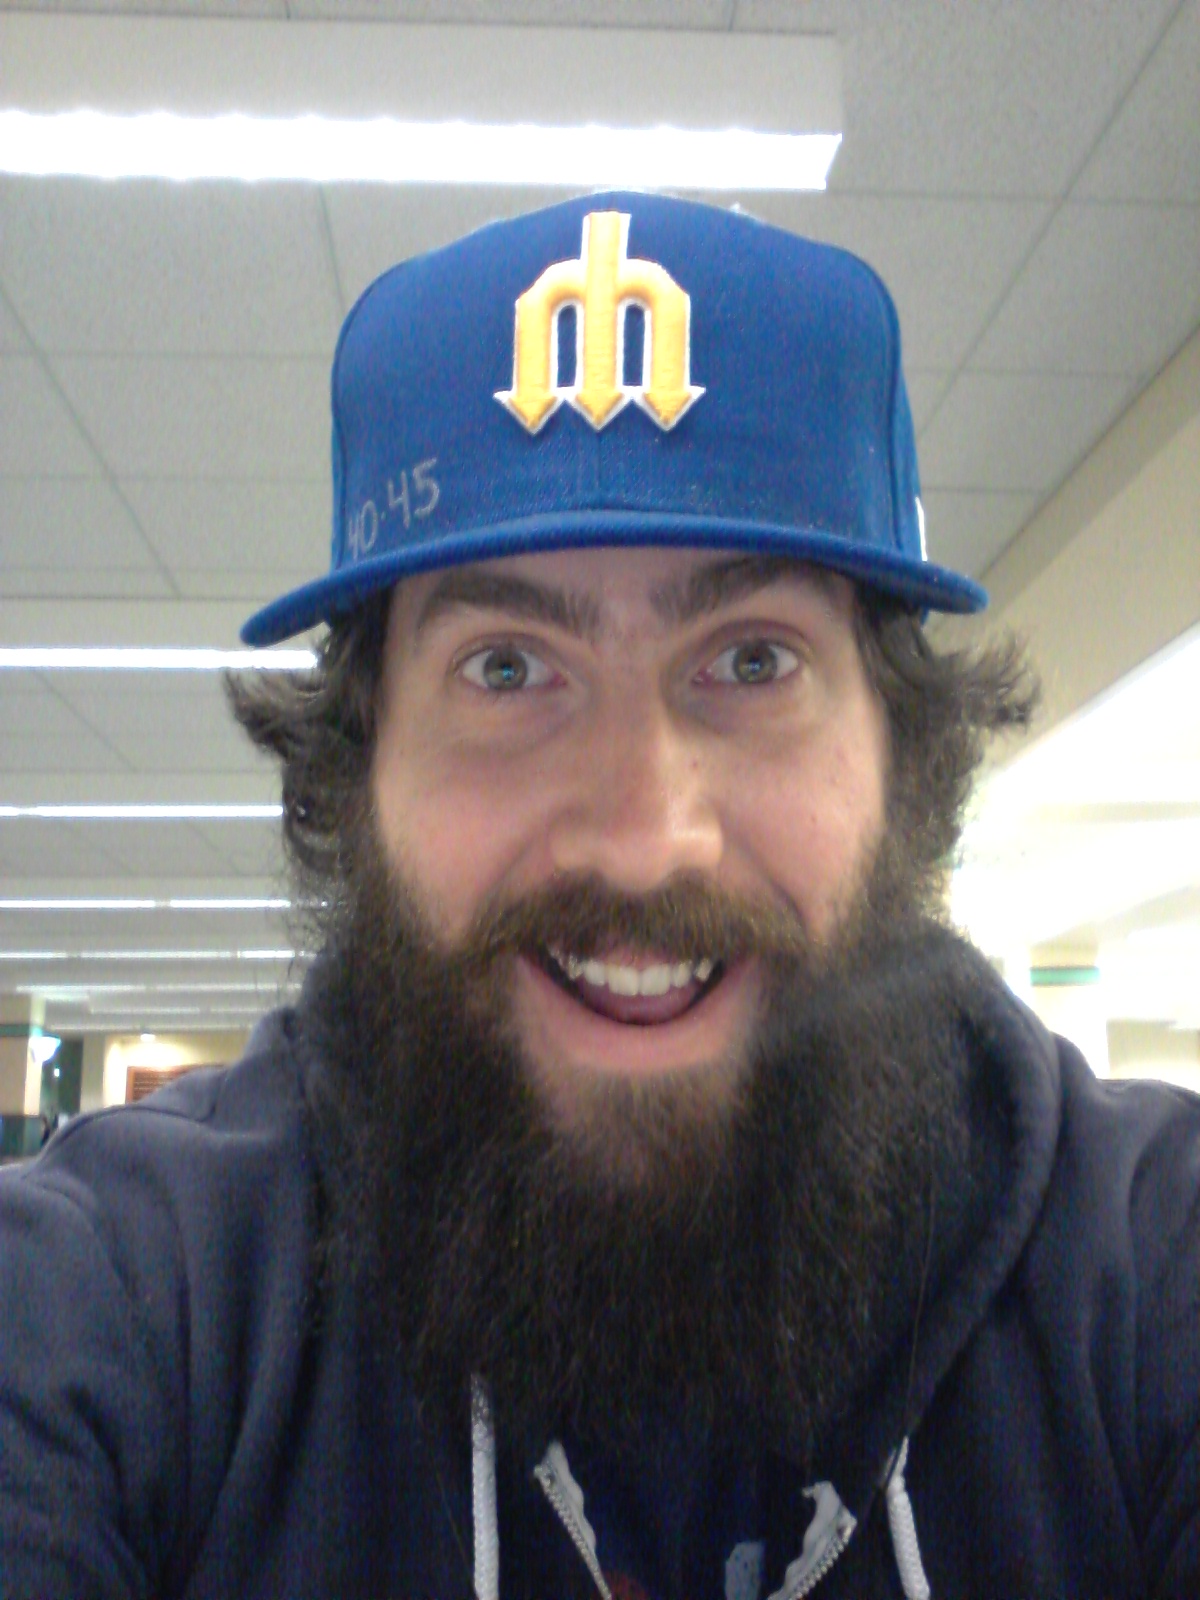 Hats and Tats: A Lifestyle: March 4- Seattle Mariners